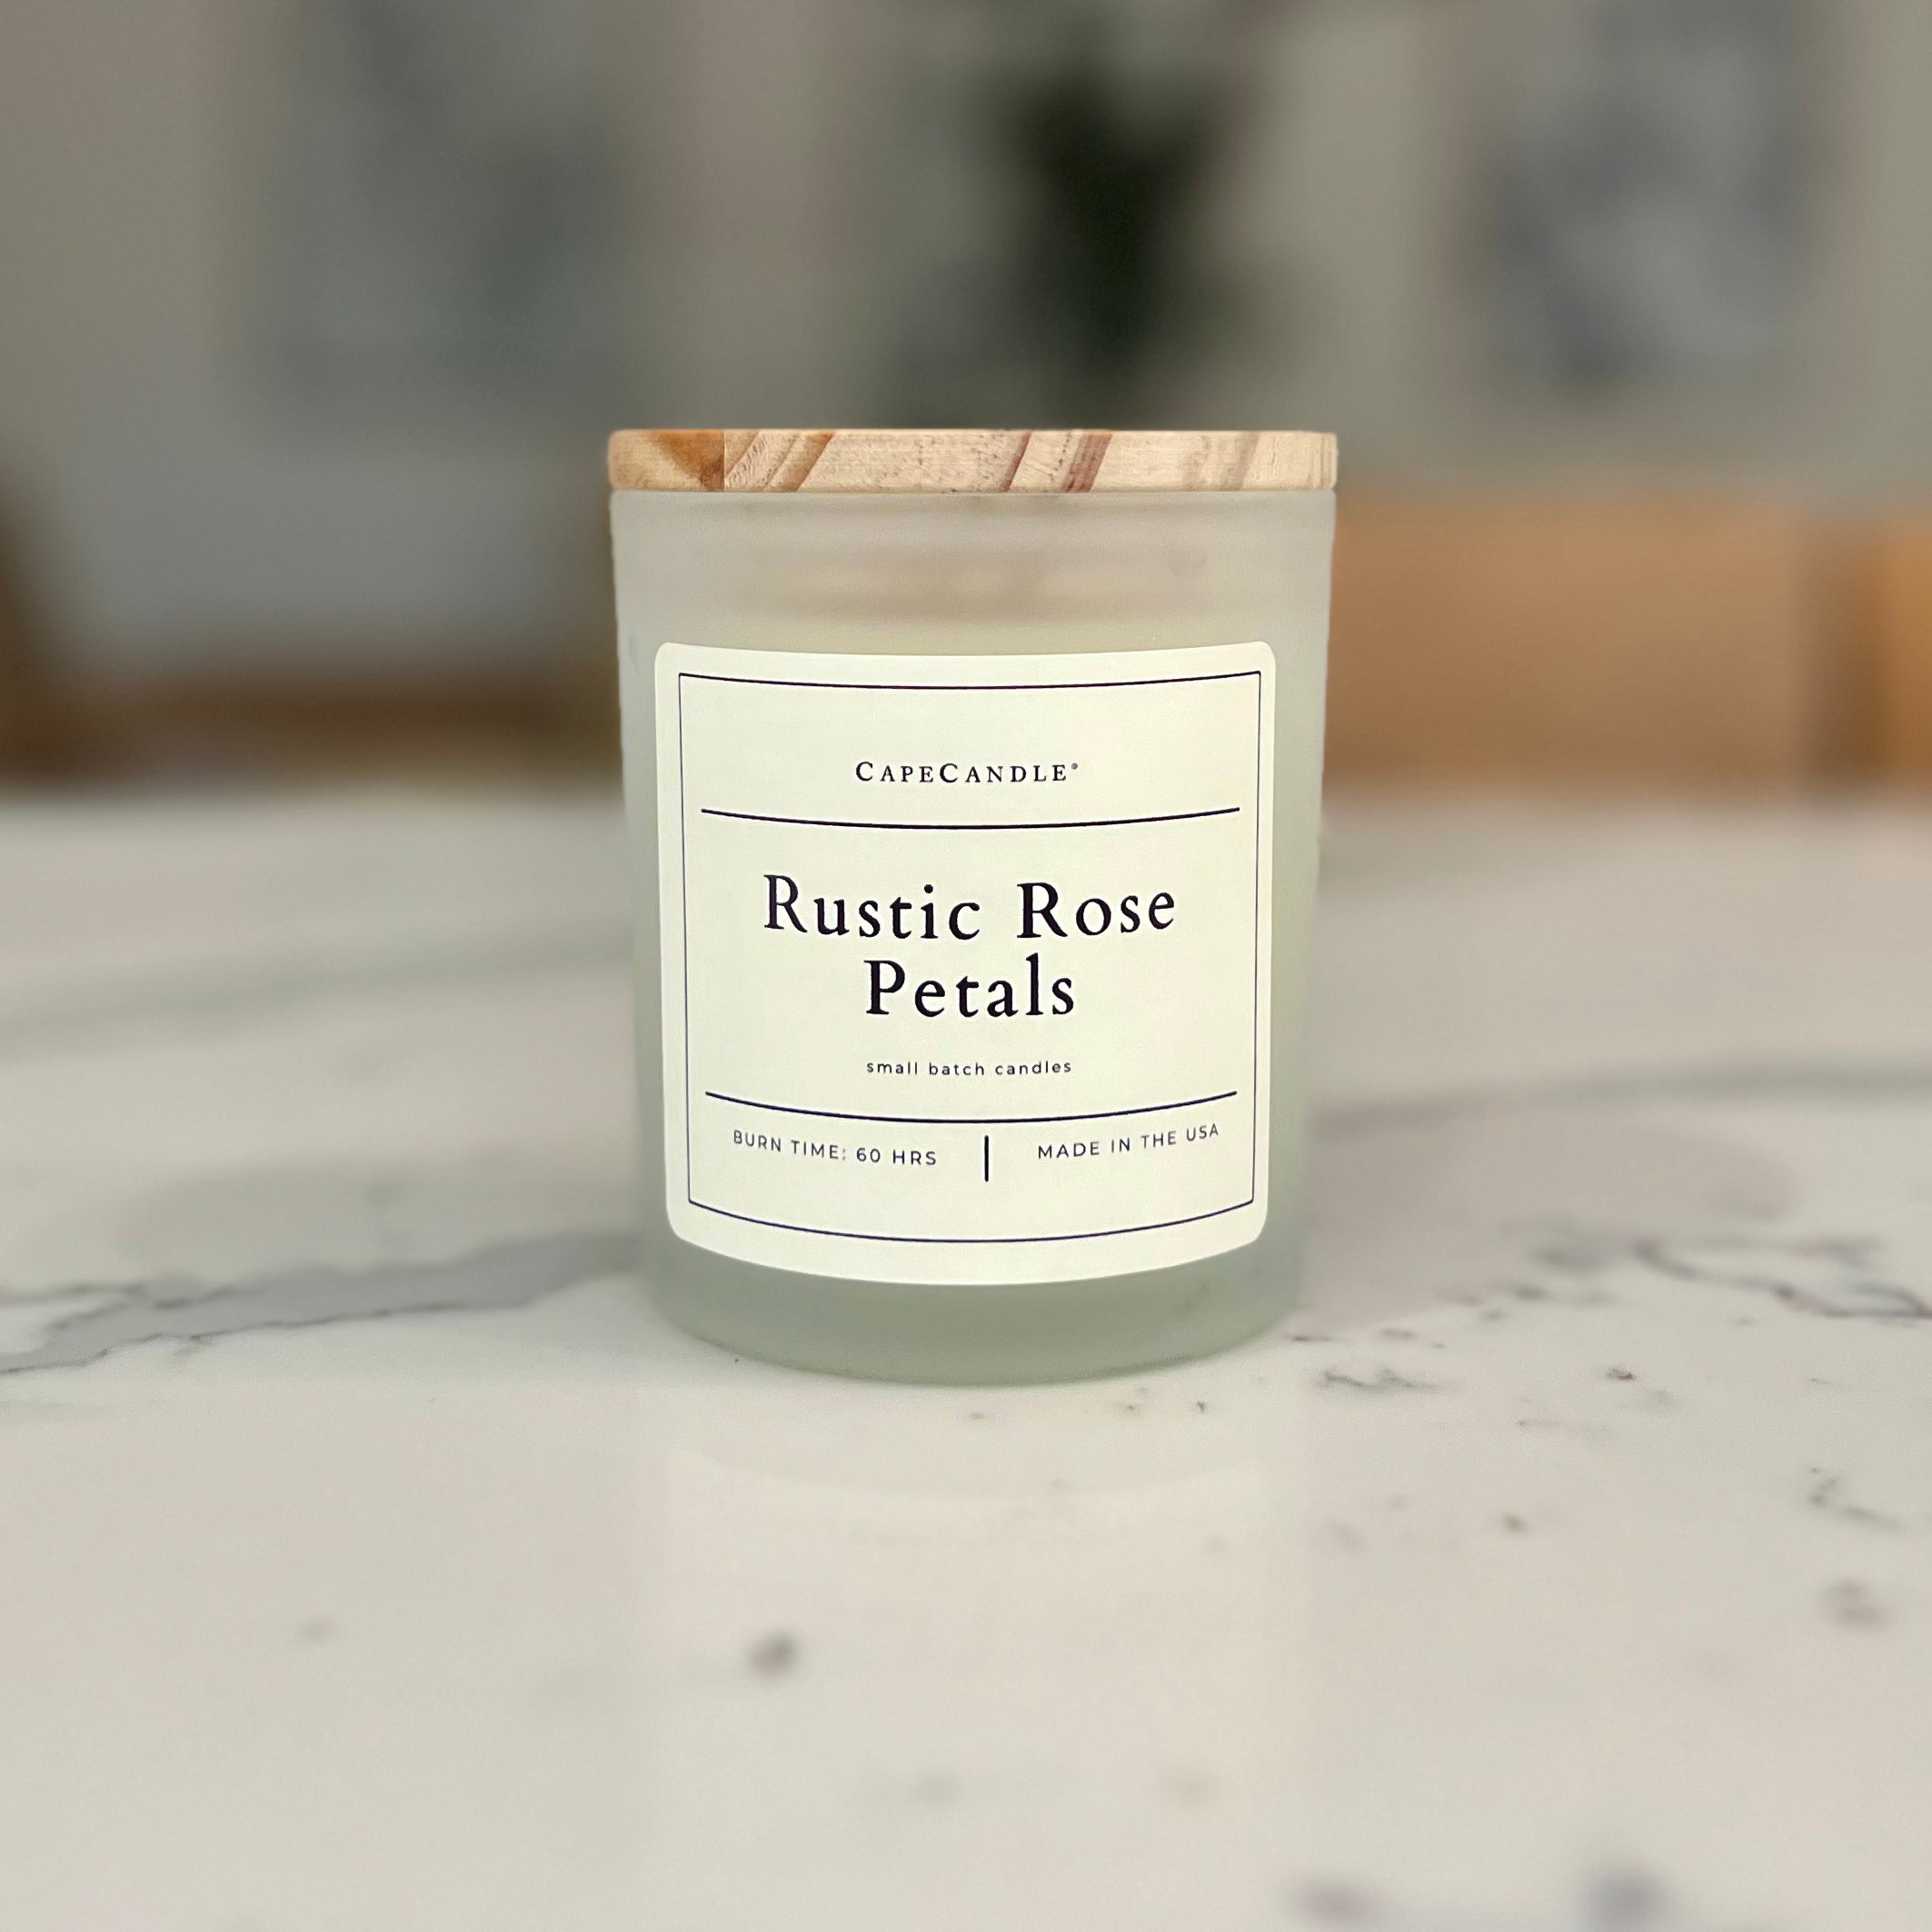 Rustic Rose Petals Small Batch Poured Candle